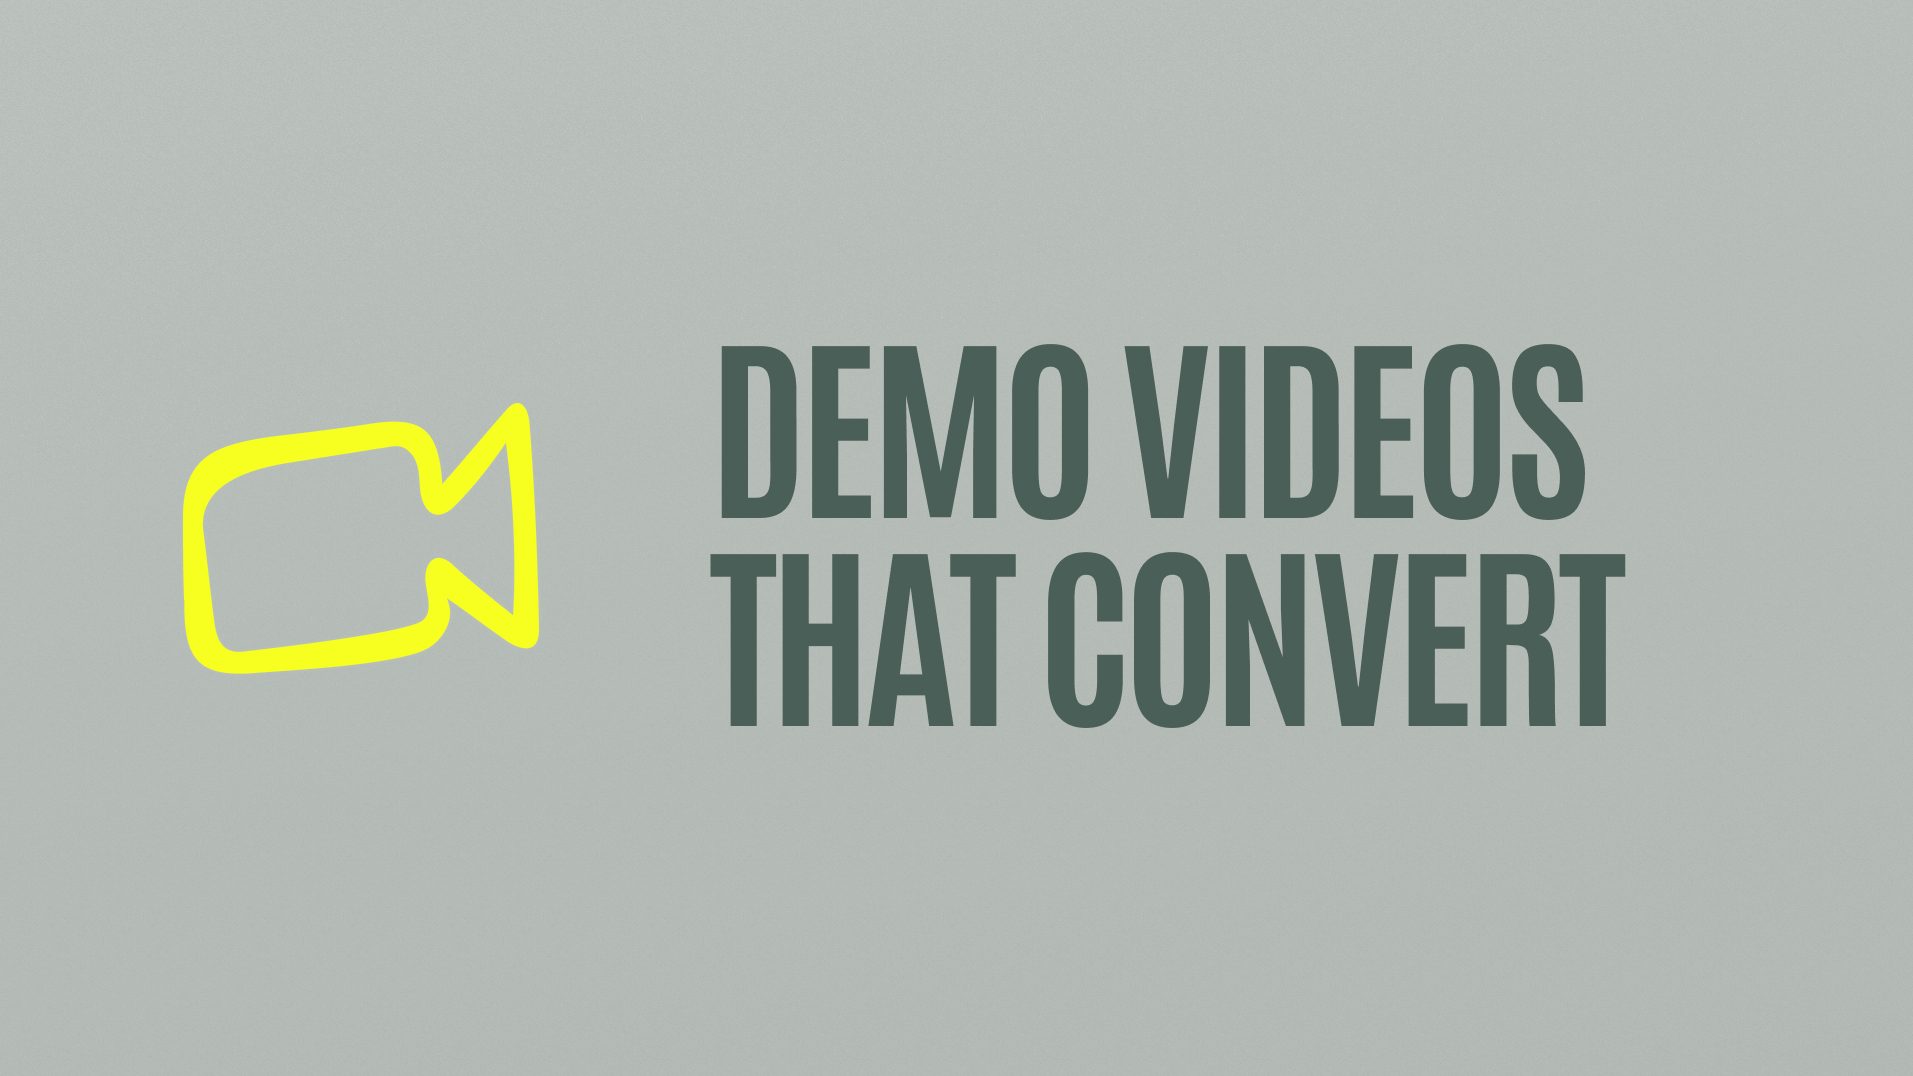 Demo Videos That Convert logo with a video camera outline